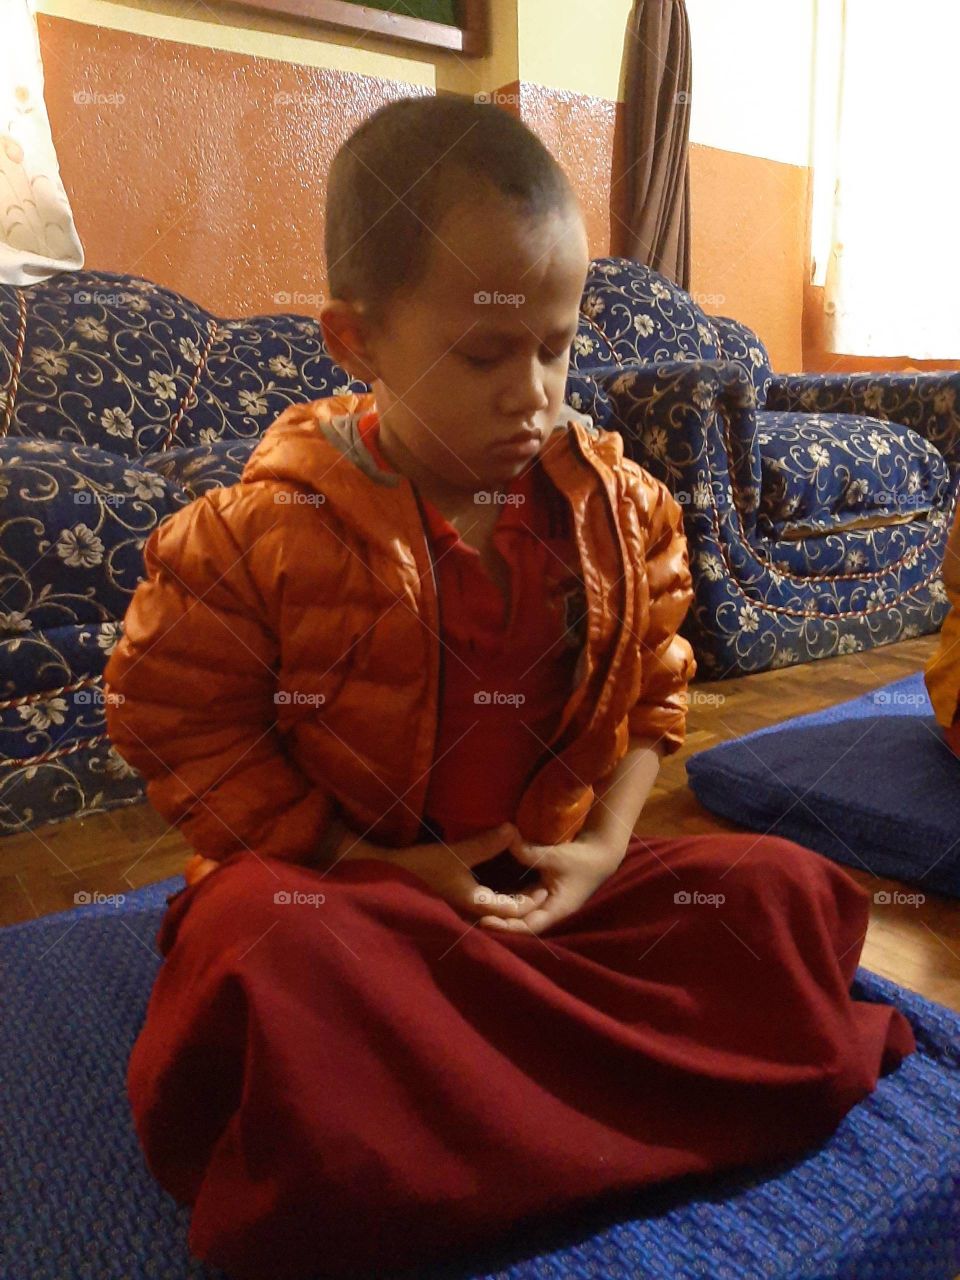 Little meditates on his own being